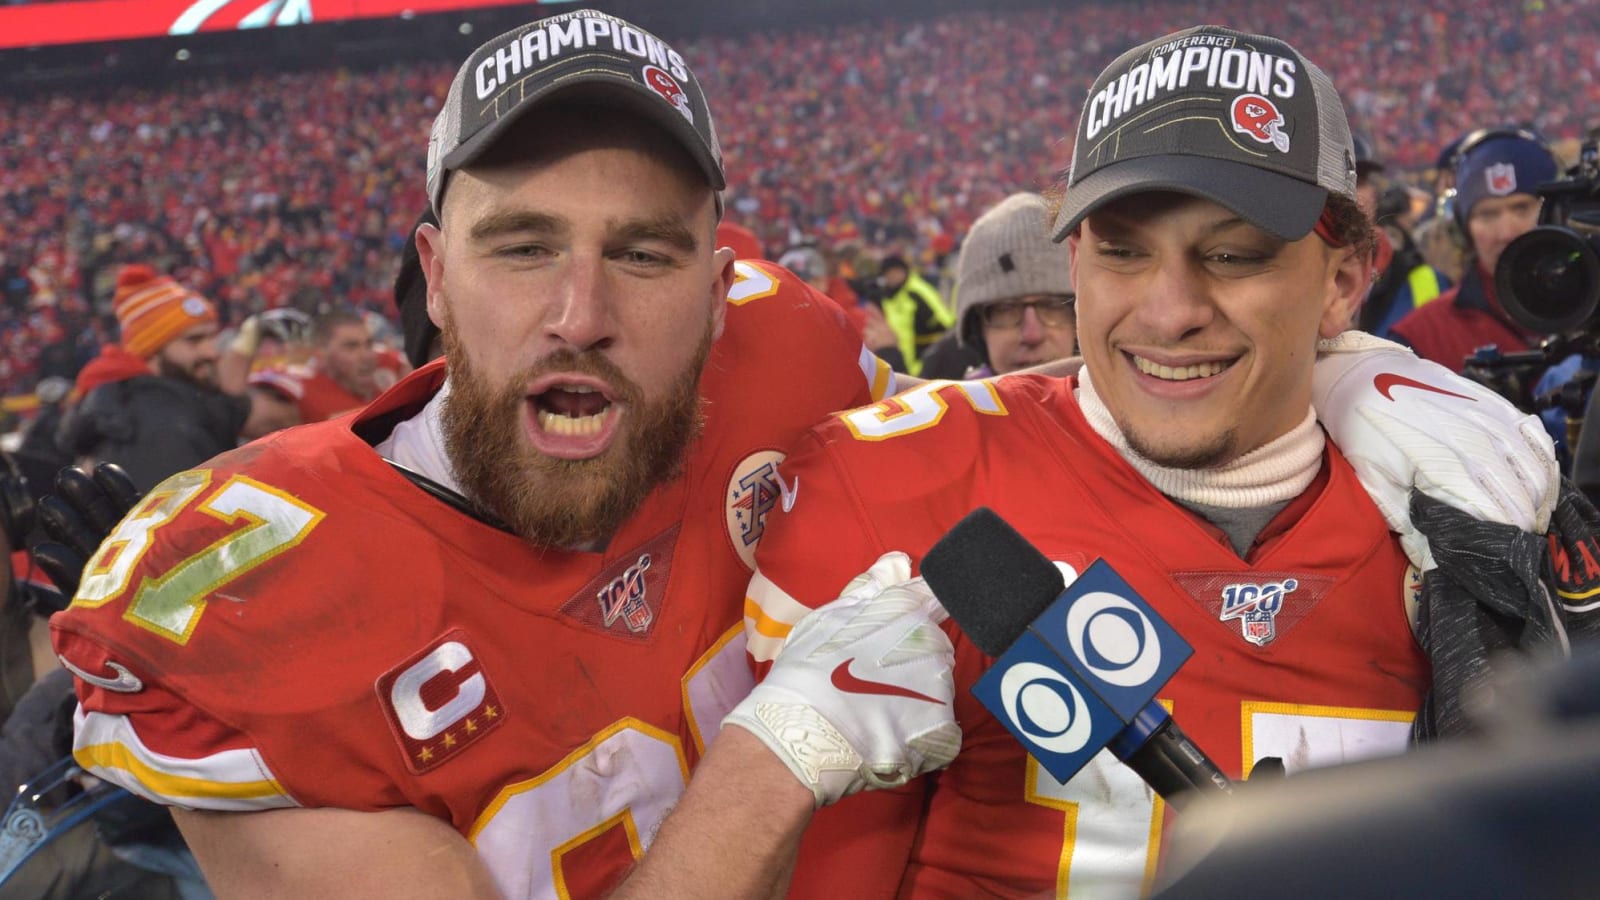 Patrick Mahomes, Travis Kelce Stoked After Getting SB LVII Rings!